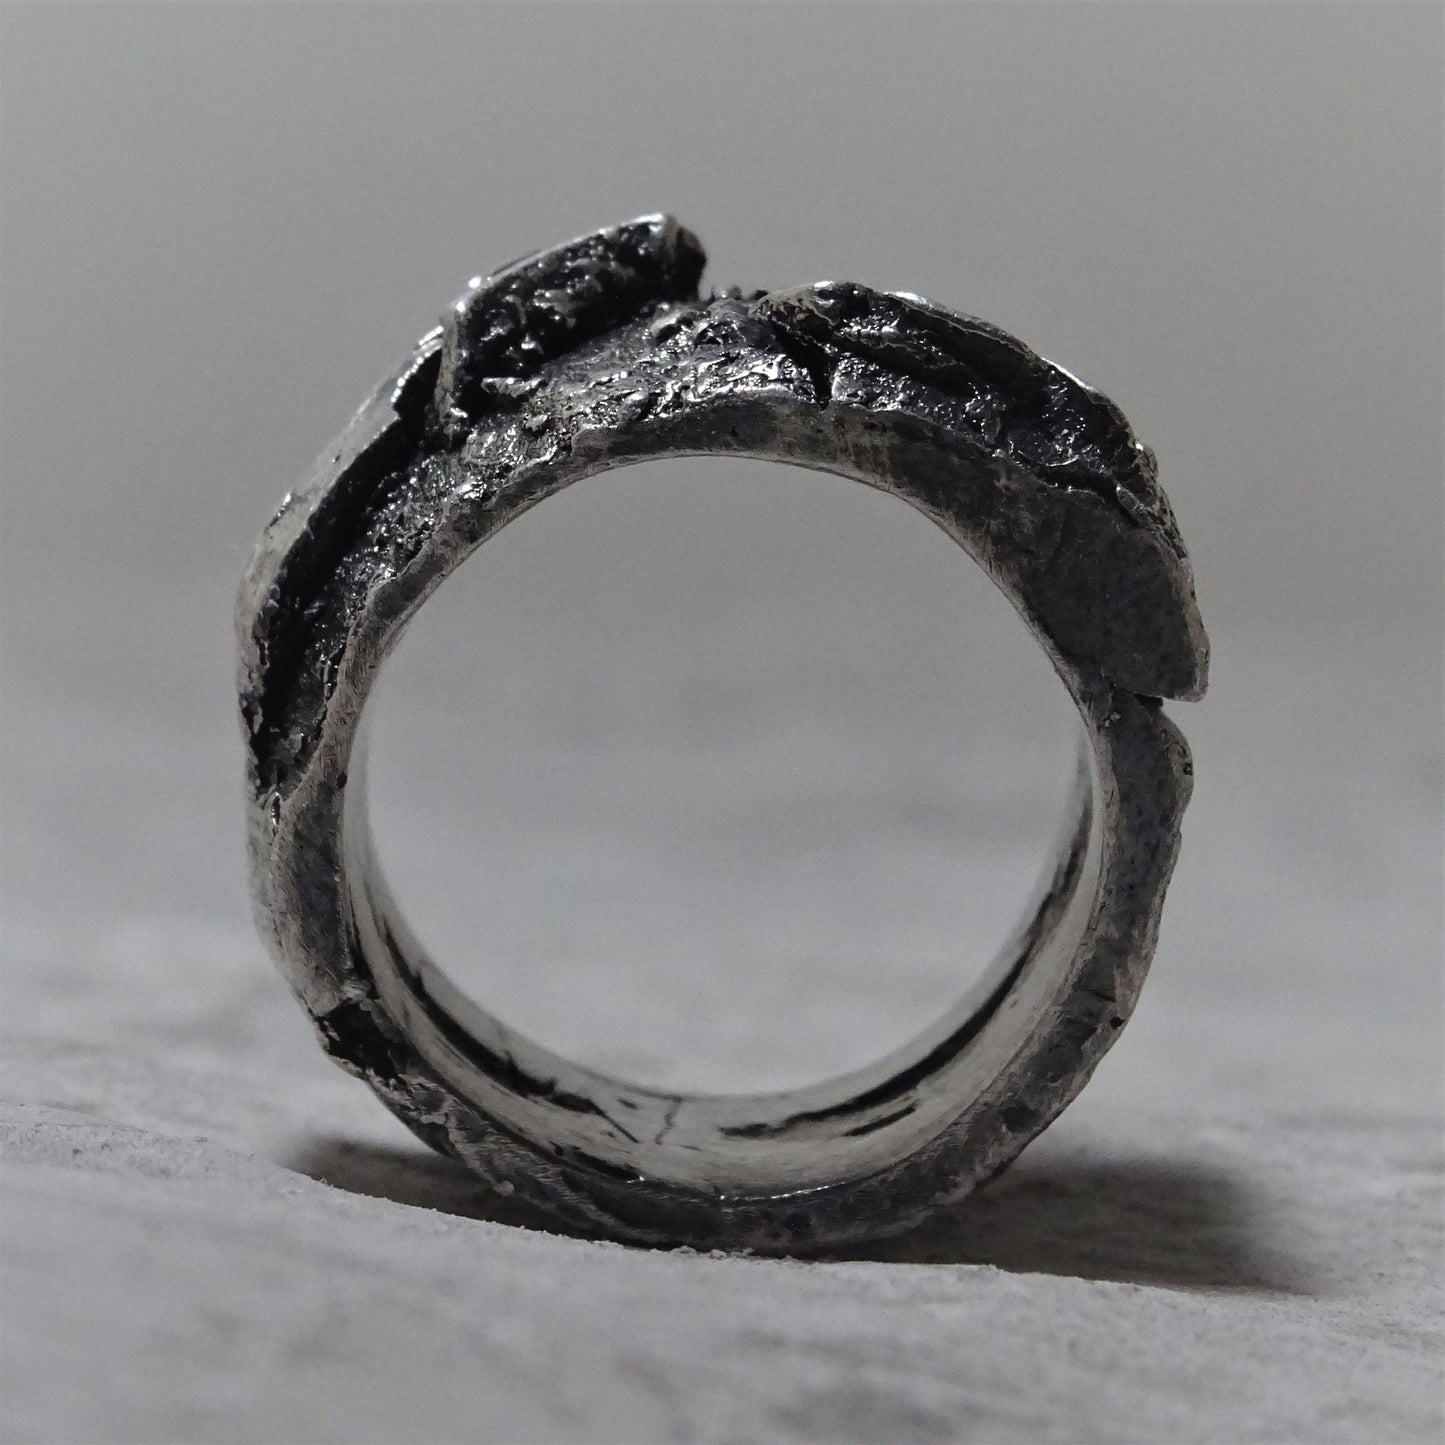 Magma ring- unusual ring with a unique texture of molten stone Unusual rings Project50g 